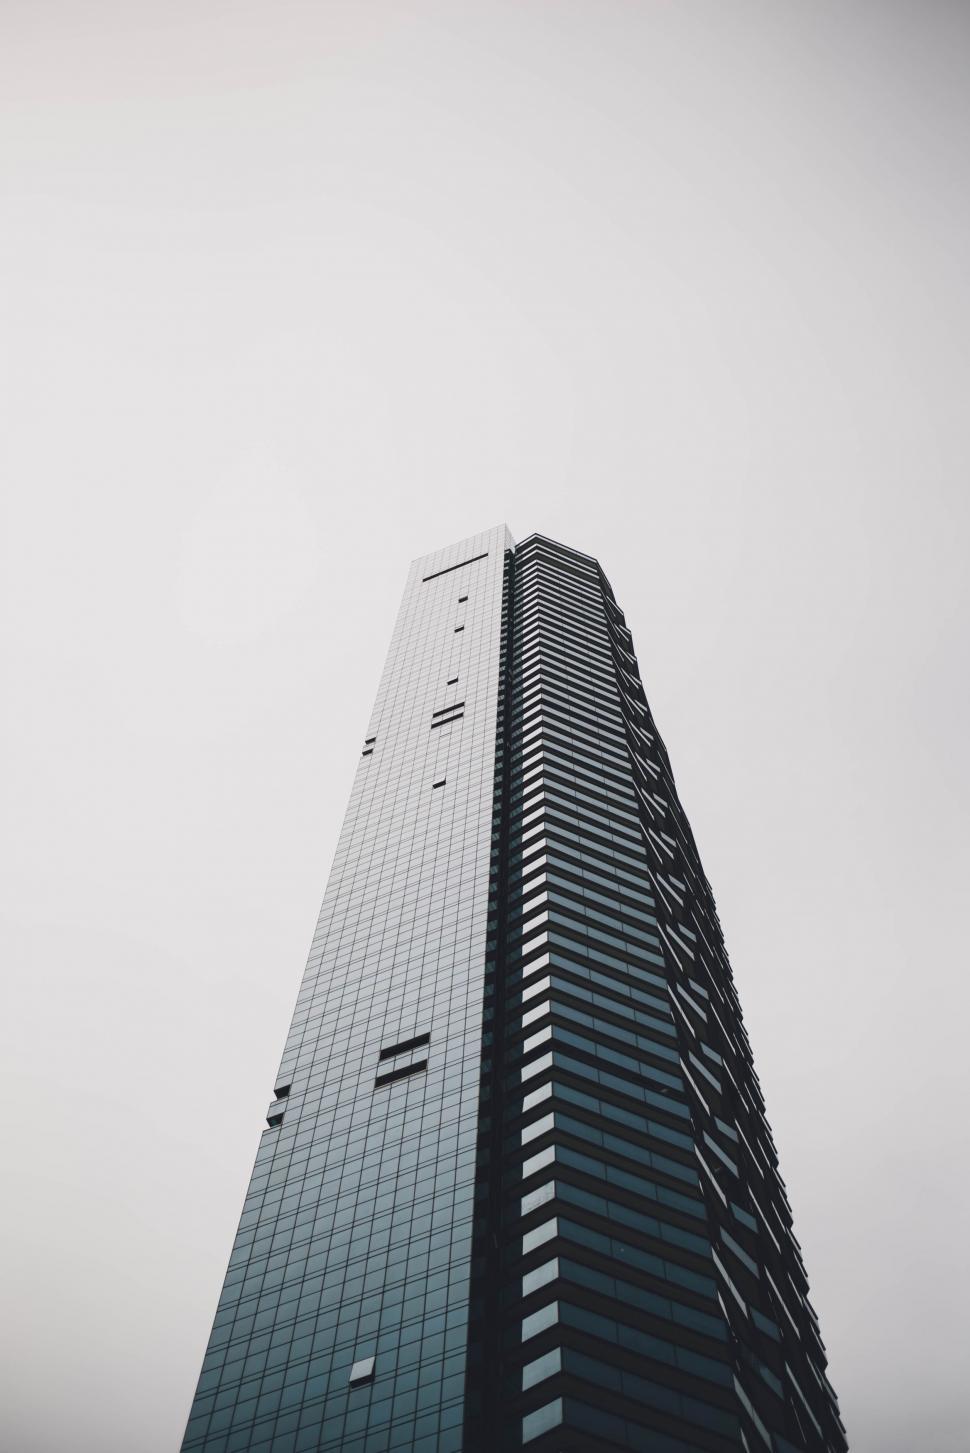 Free Image of Towering Skyscraper Reaching Into the Sky 